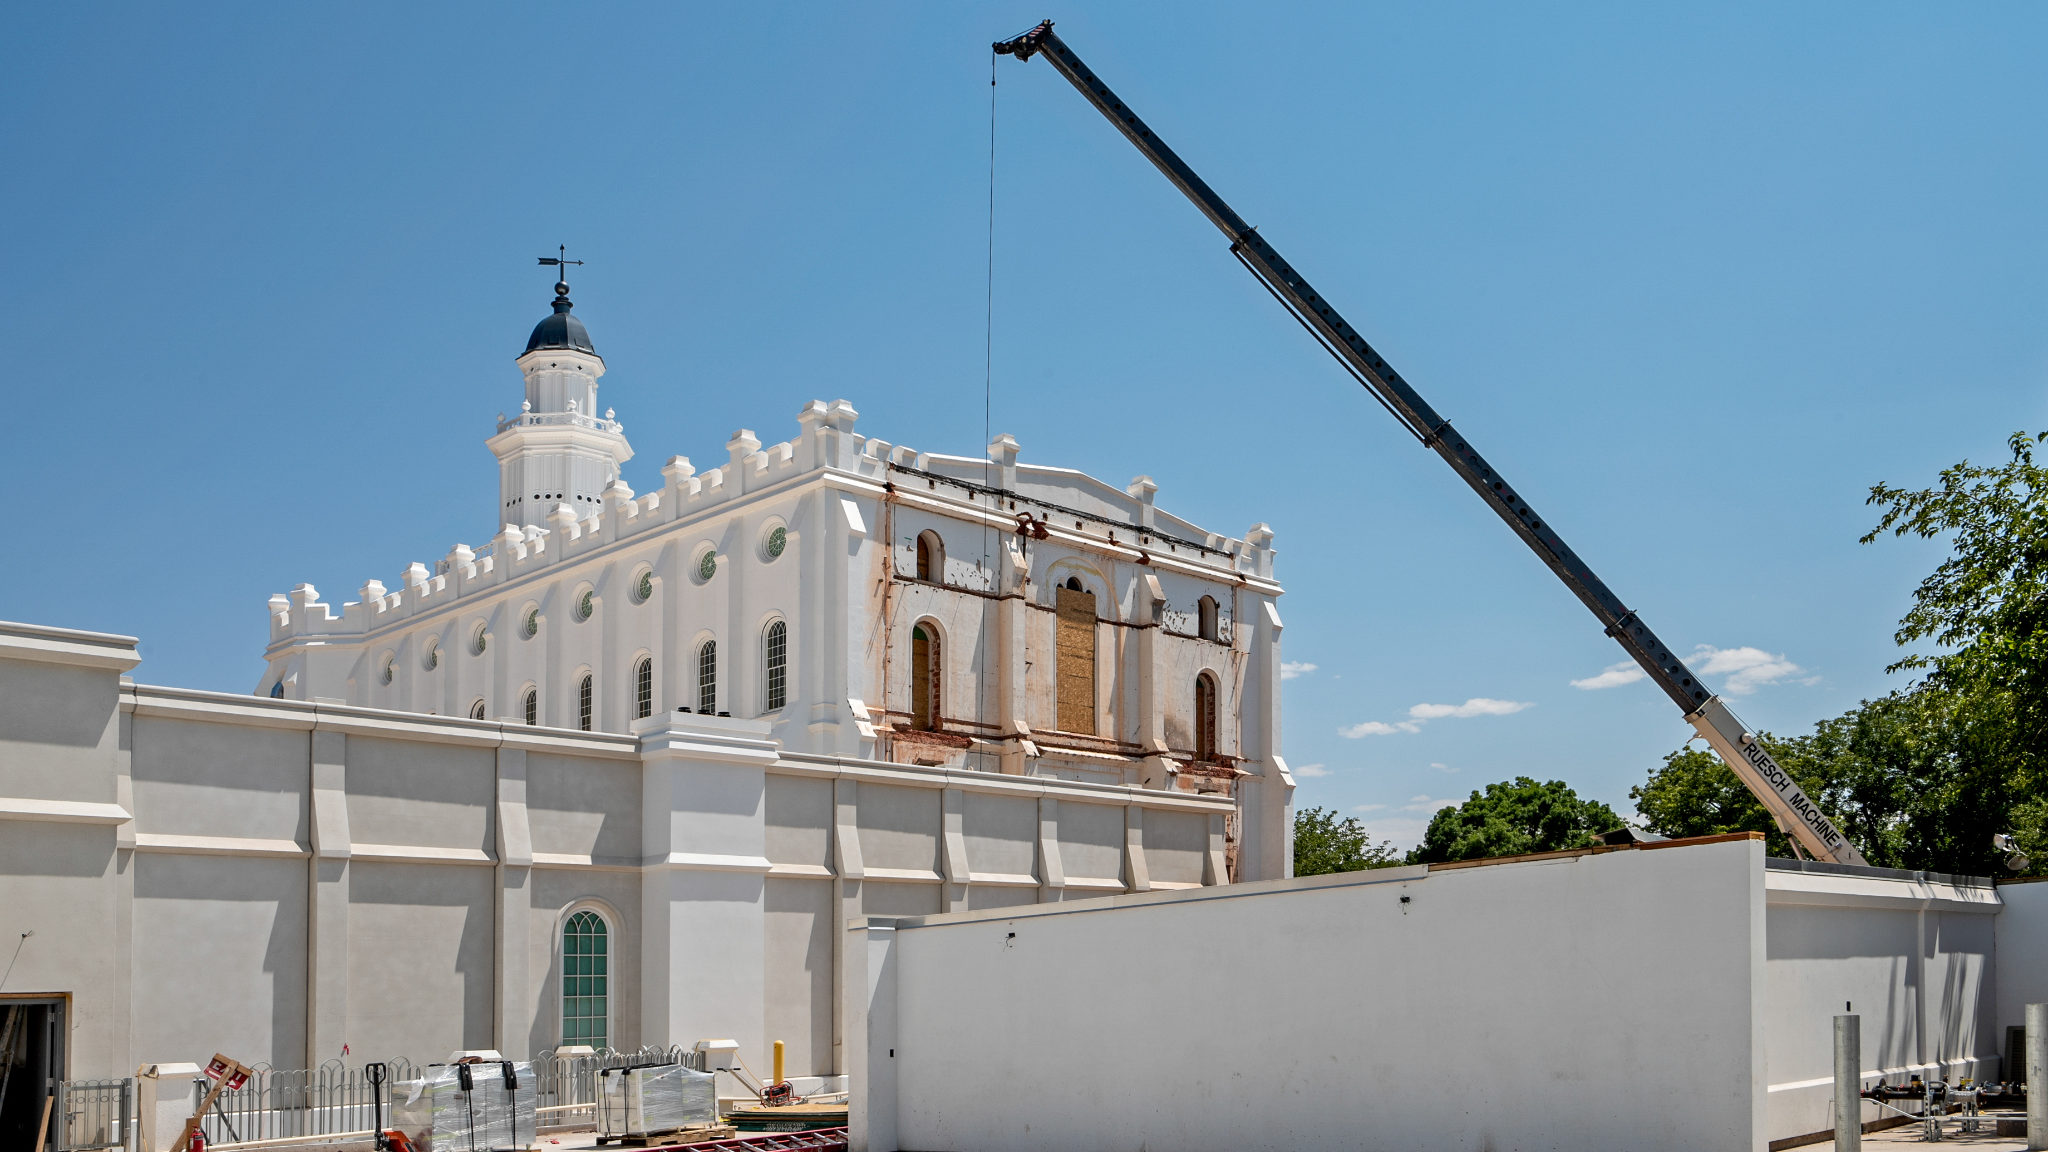 New temples were announced by The Church of Jesus Christ of Latter-day Saints for locations across ...